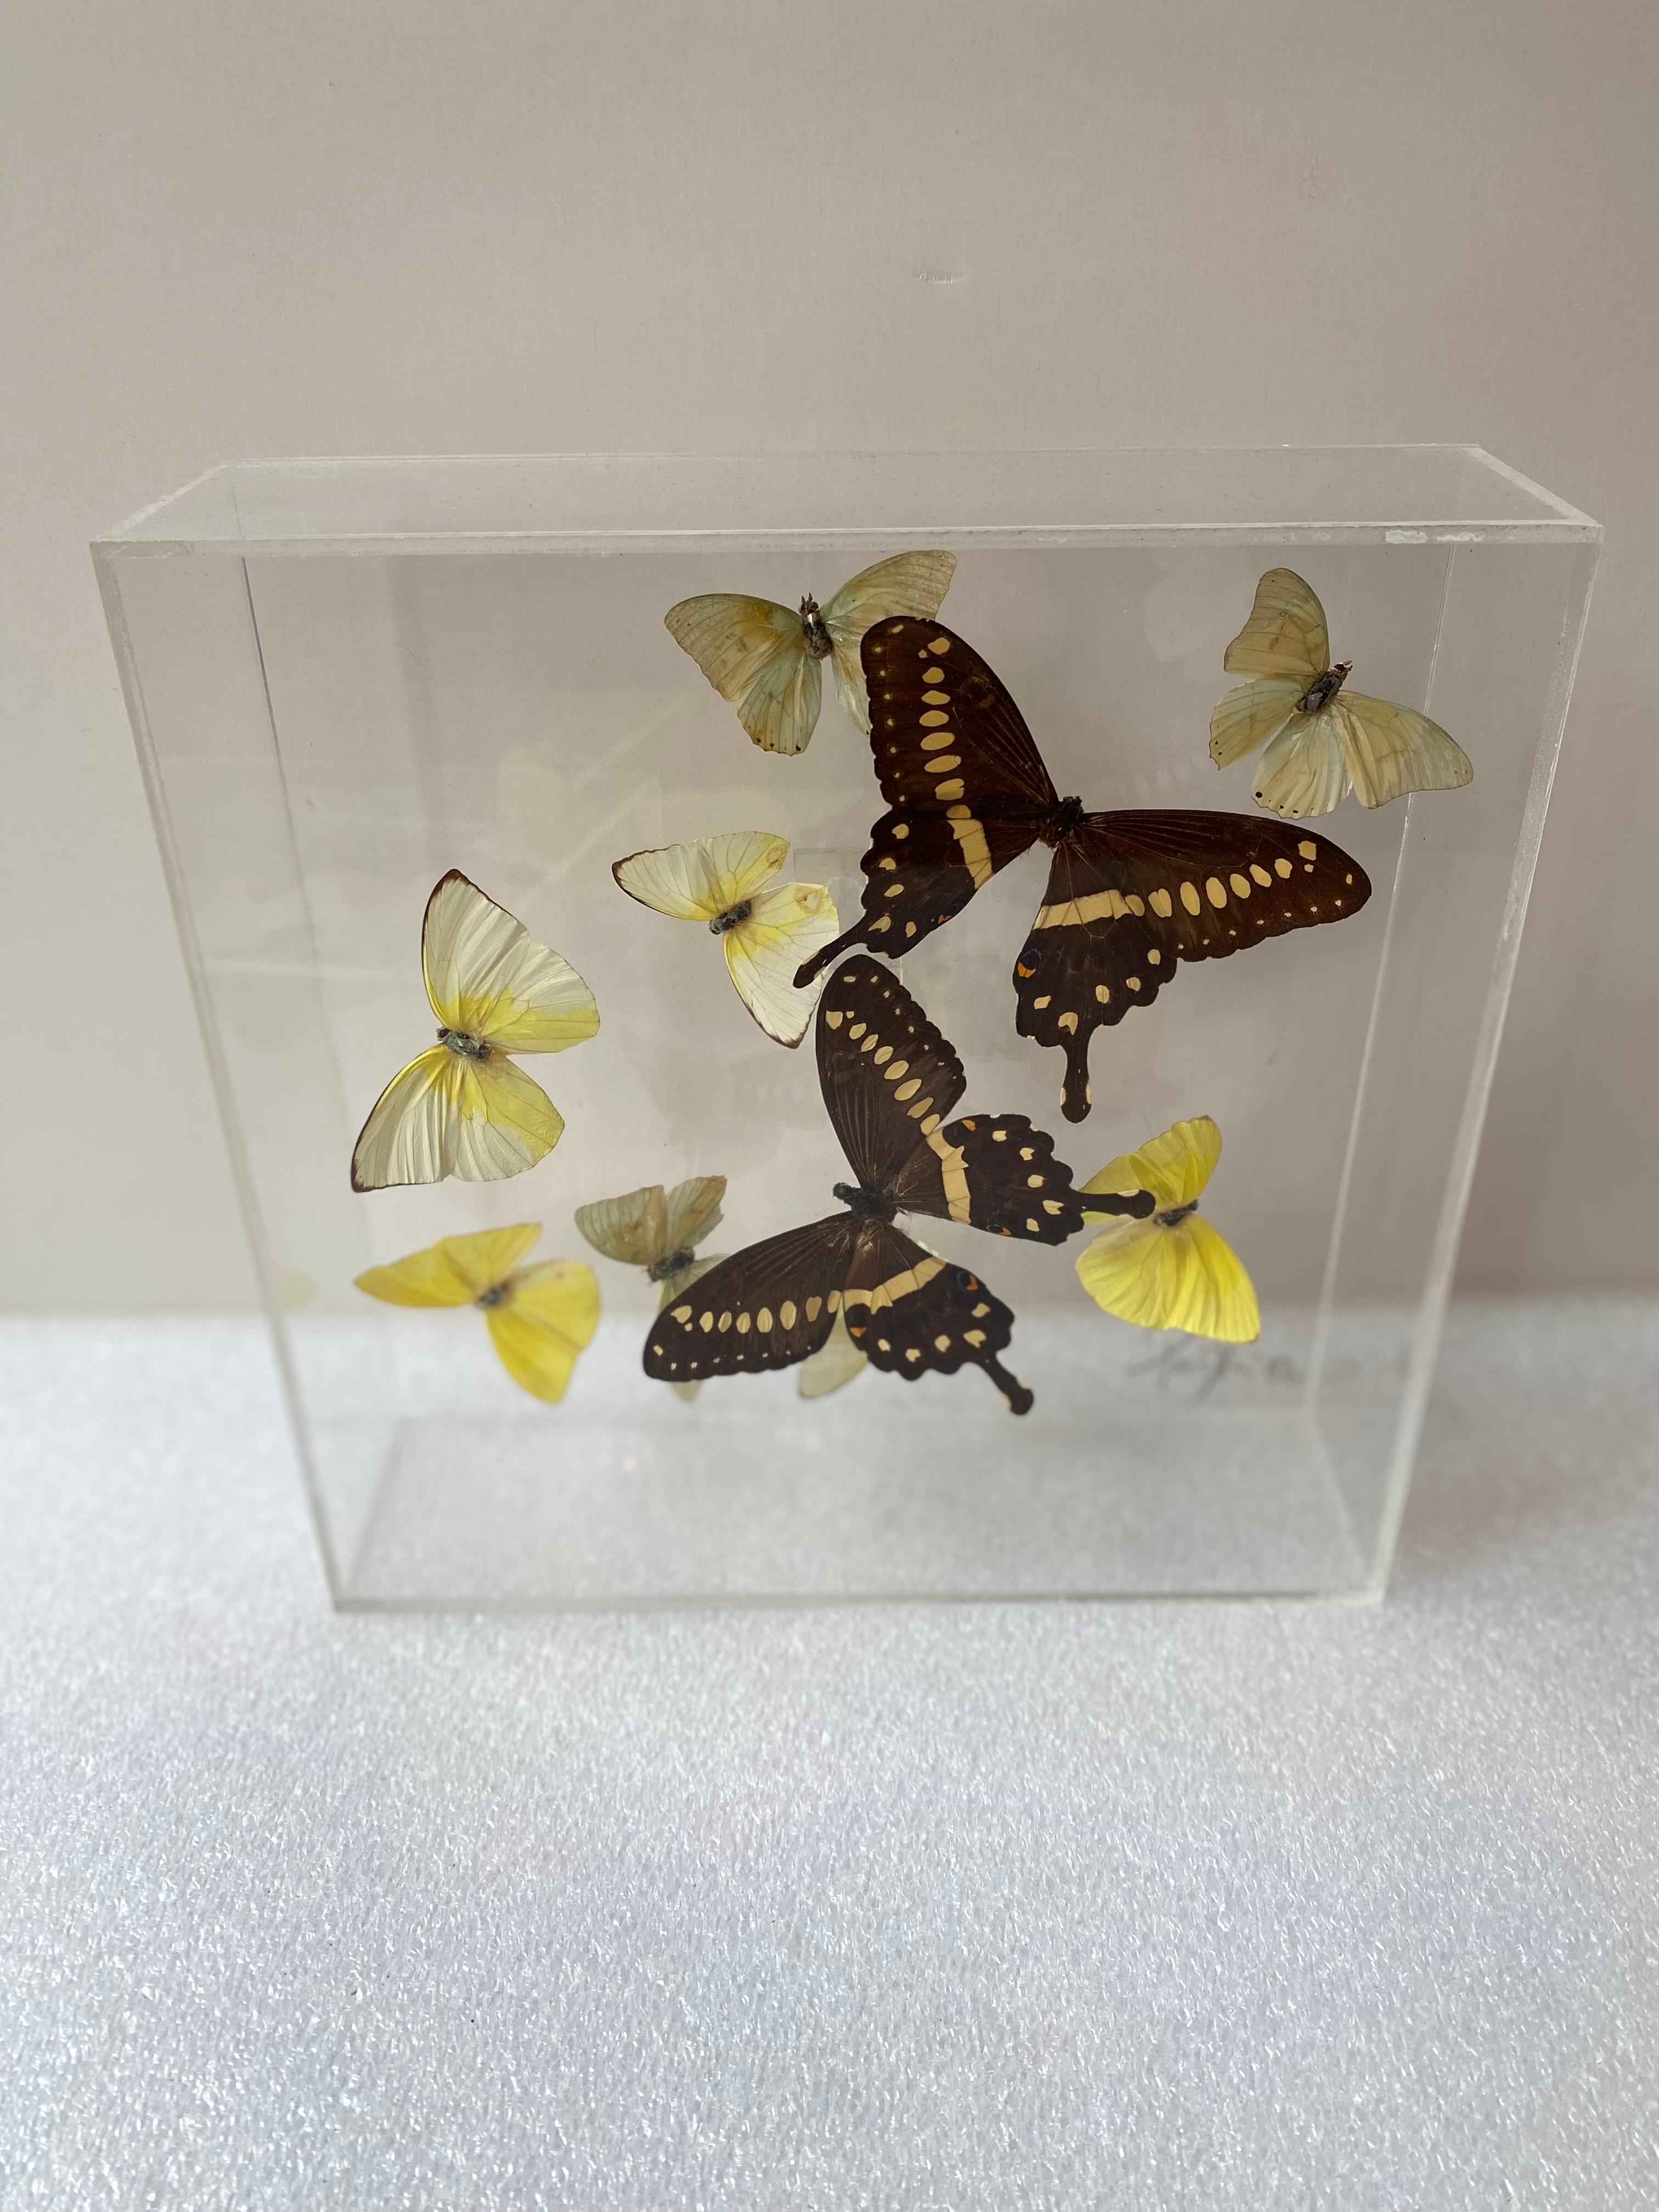 Pair of lucite boxes with mounted butterflies. Signed by the Artist Paul Purington. 
 Very nice quality!  One dated 1979 and the other 1986. Nice bright colors, still in very nice condition! One has a mounting tab and the other does not. Look good